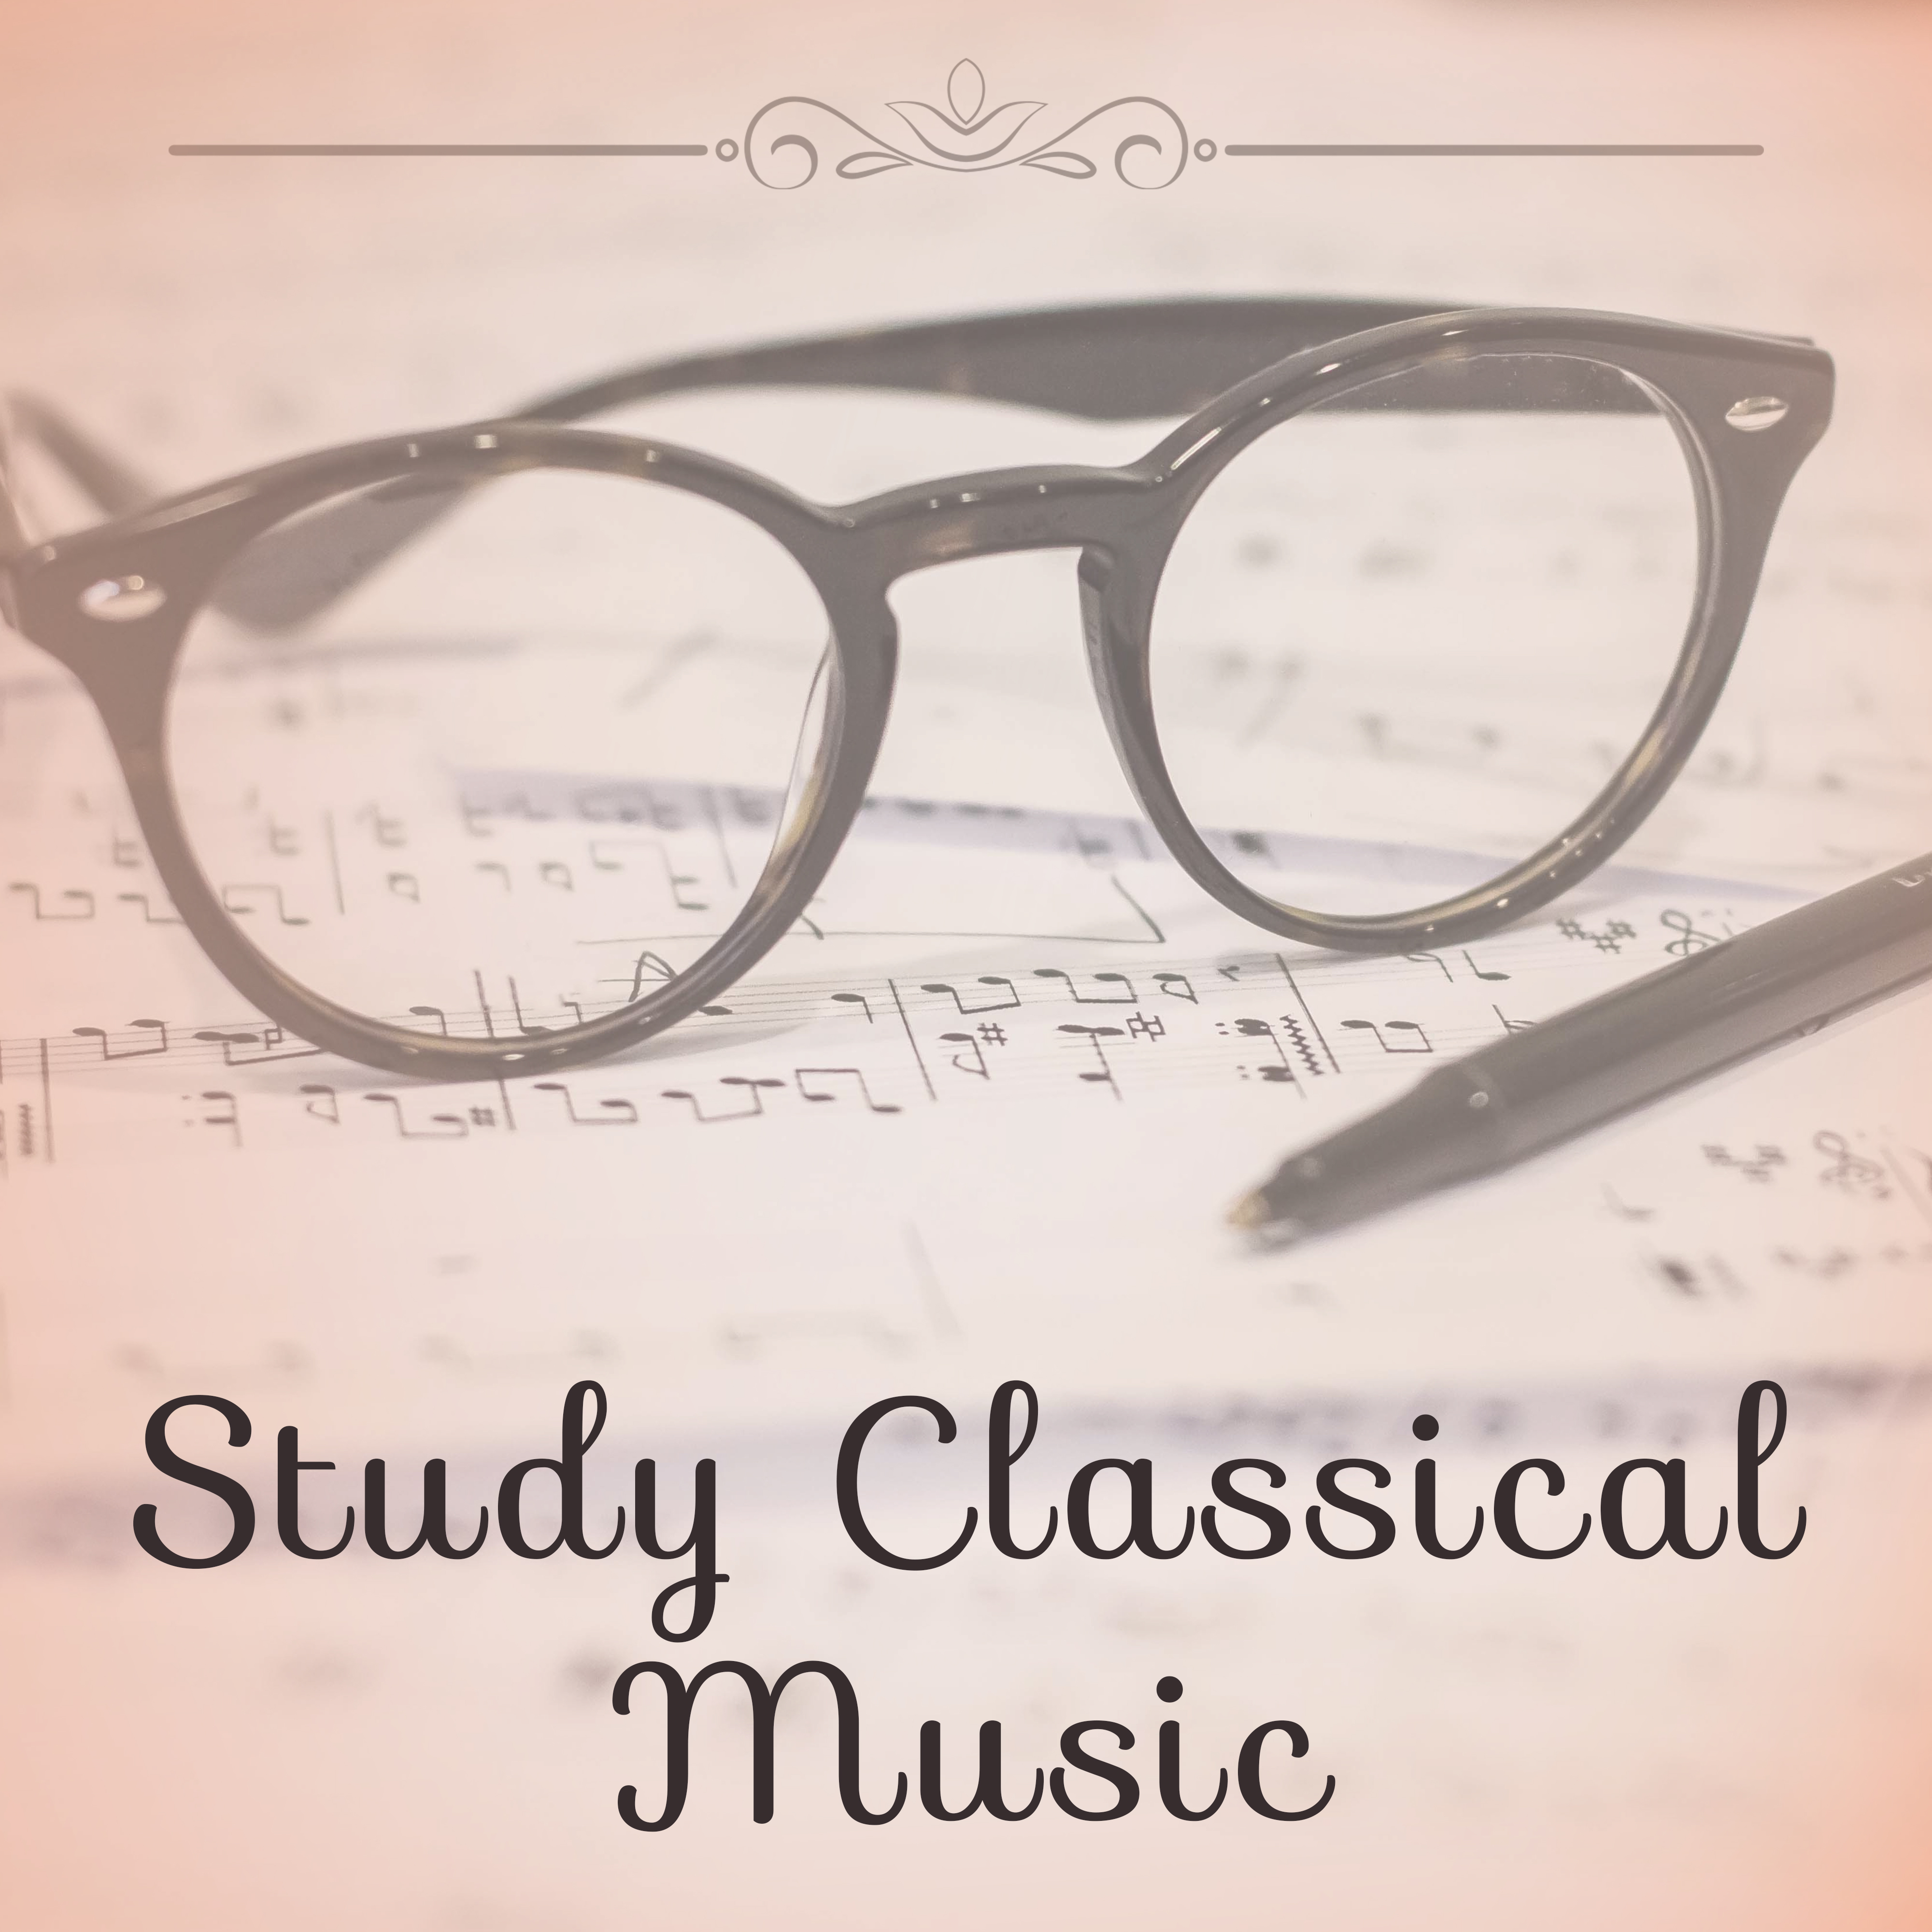 Study Classical Music – Classics Sounds to Help You Study, Prepare to Exams, Soft Music to Relax